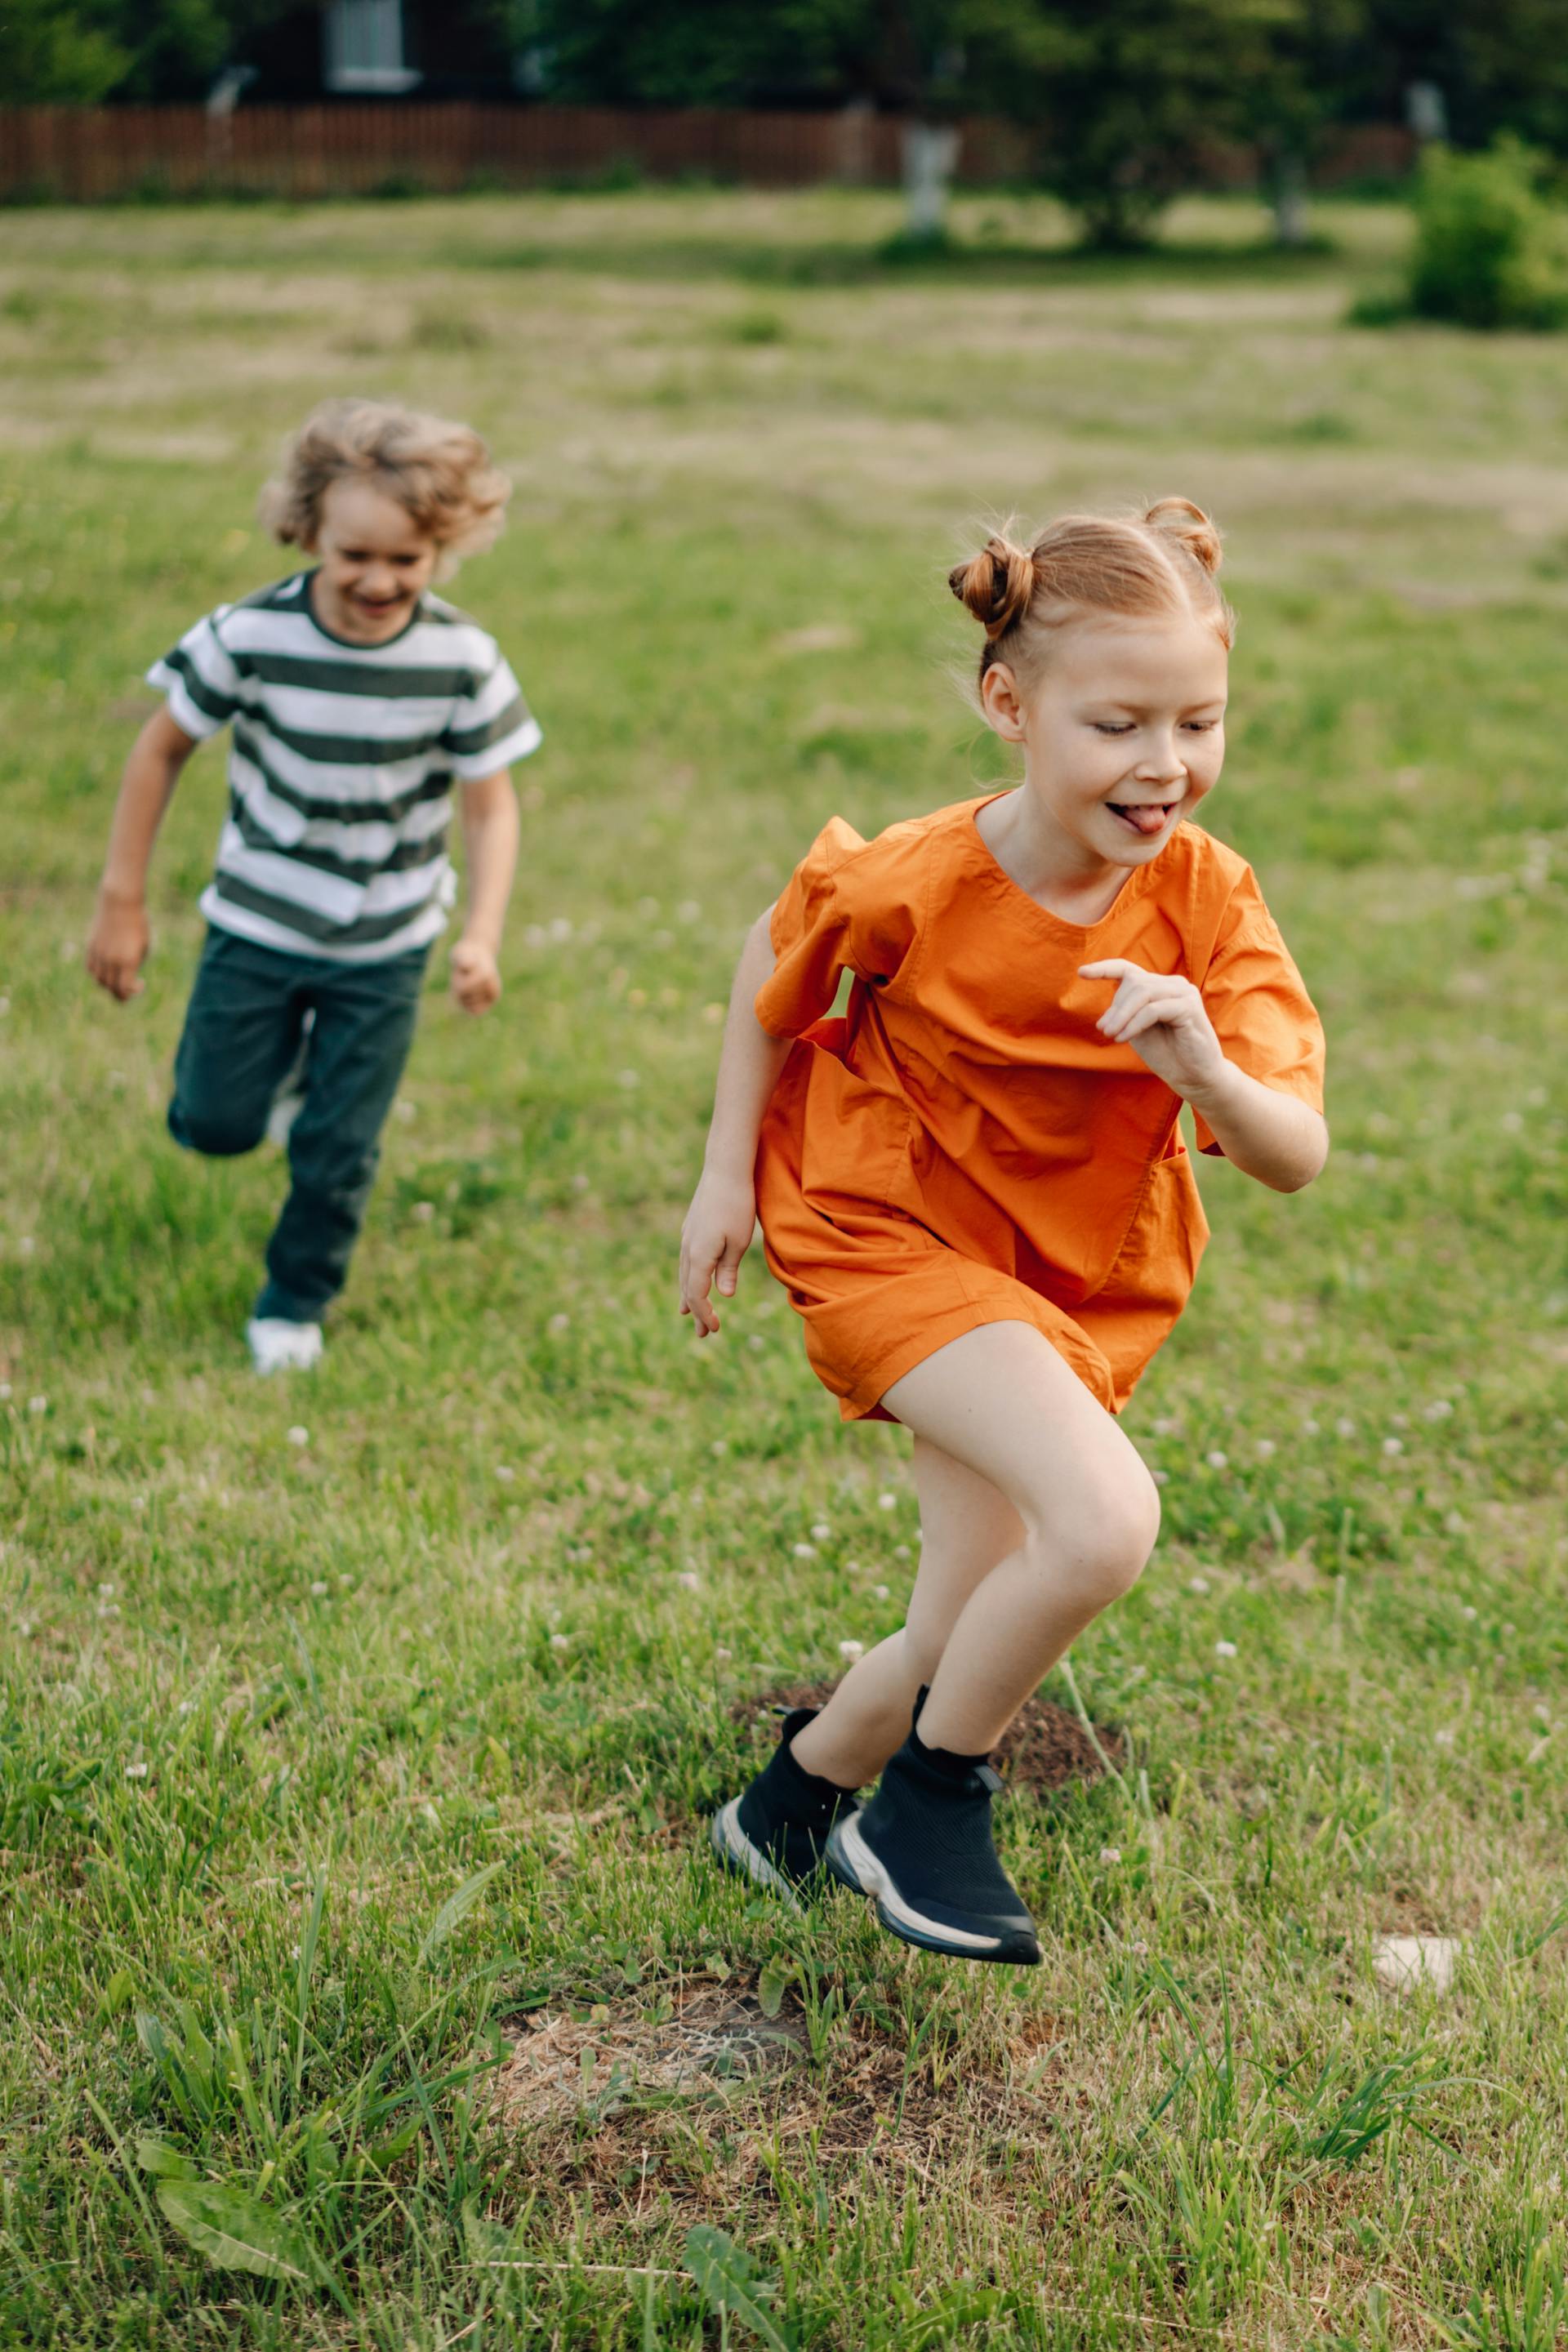 Two happy kids playing with each other | Source: Pexels